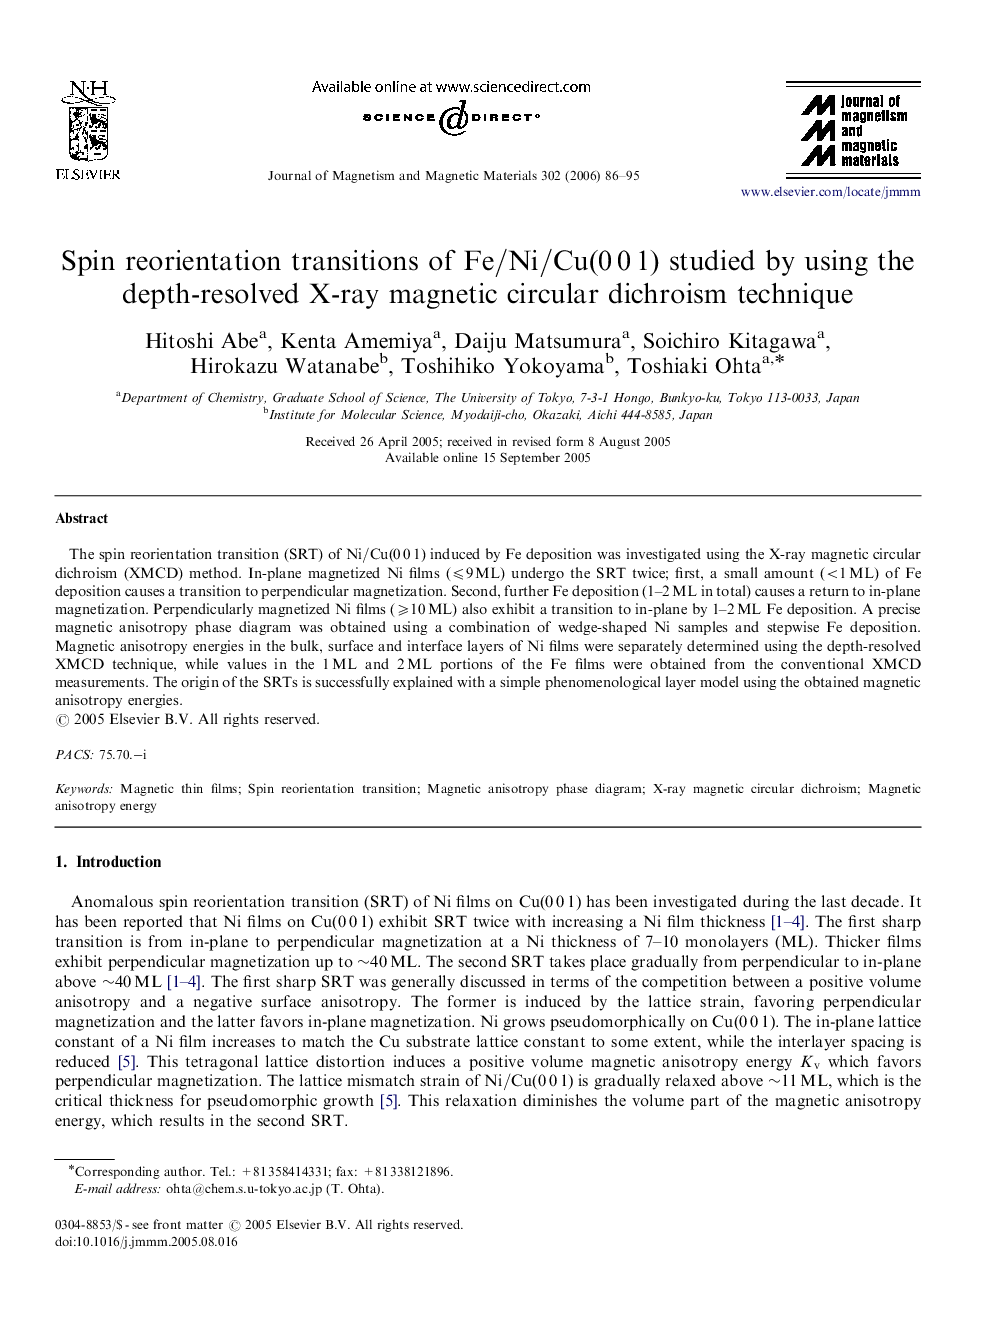 Spin reorientation transitions of Fe/Ni/Cu(001) studied by using the depth-resolved X-ray magnetic circular dichroism technique